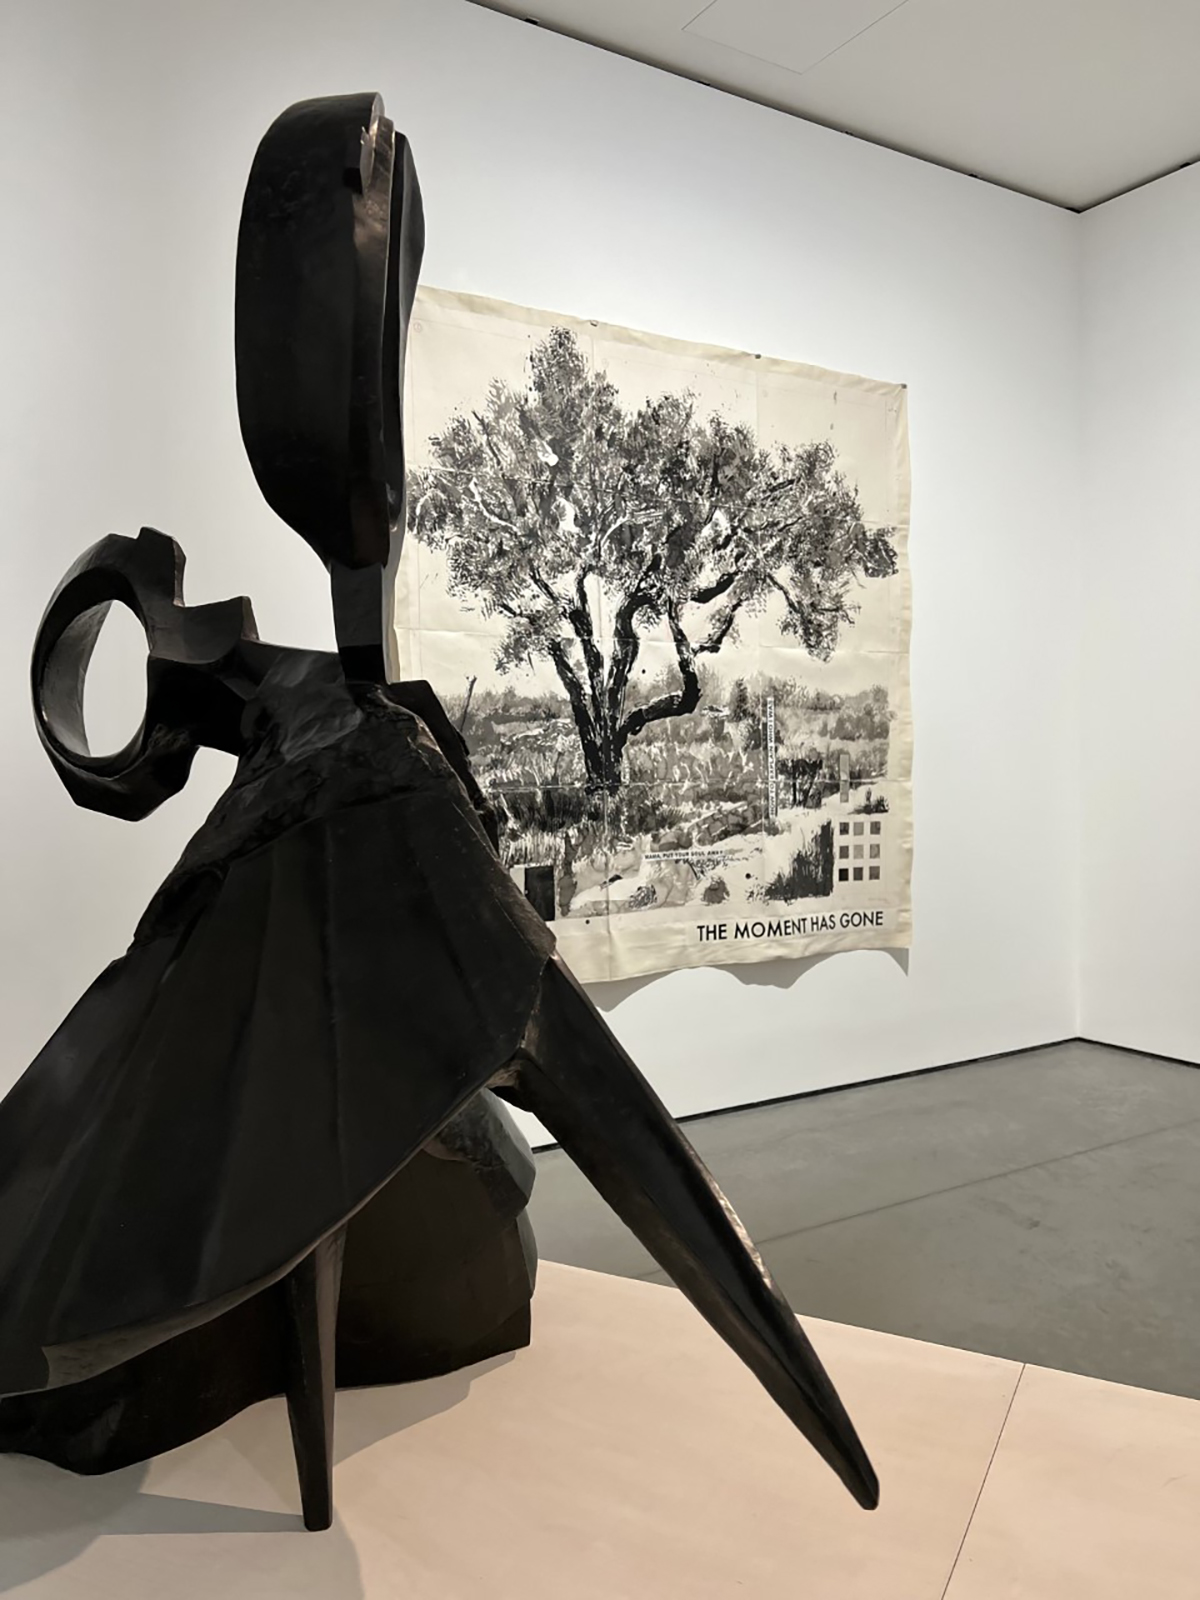 A painting of a tree with a sculpture in front of it